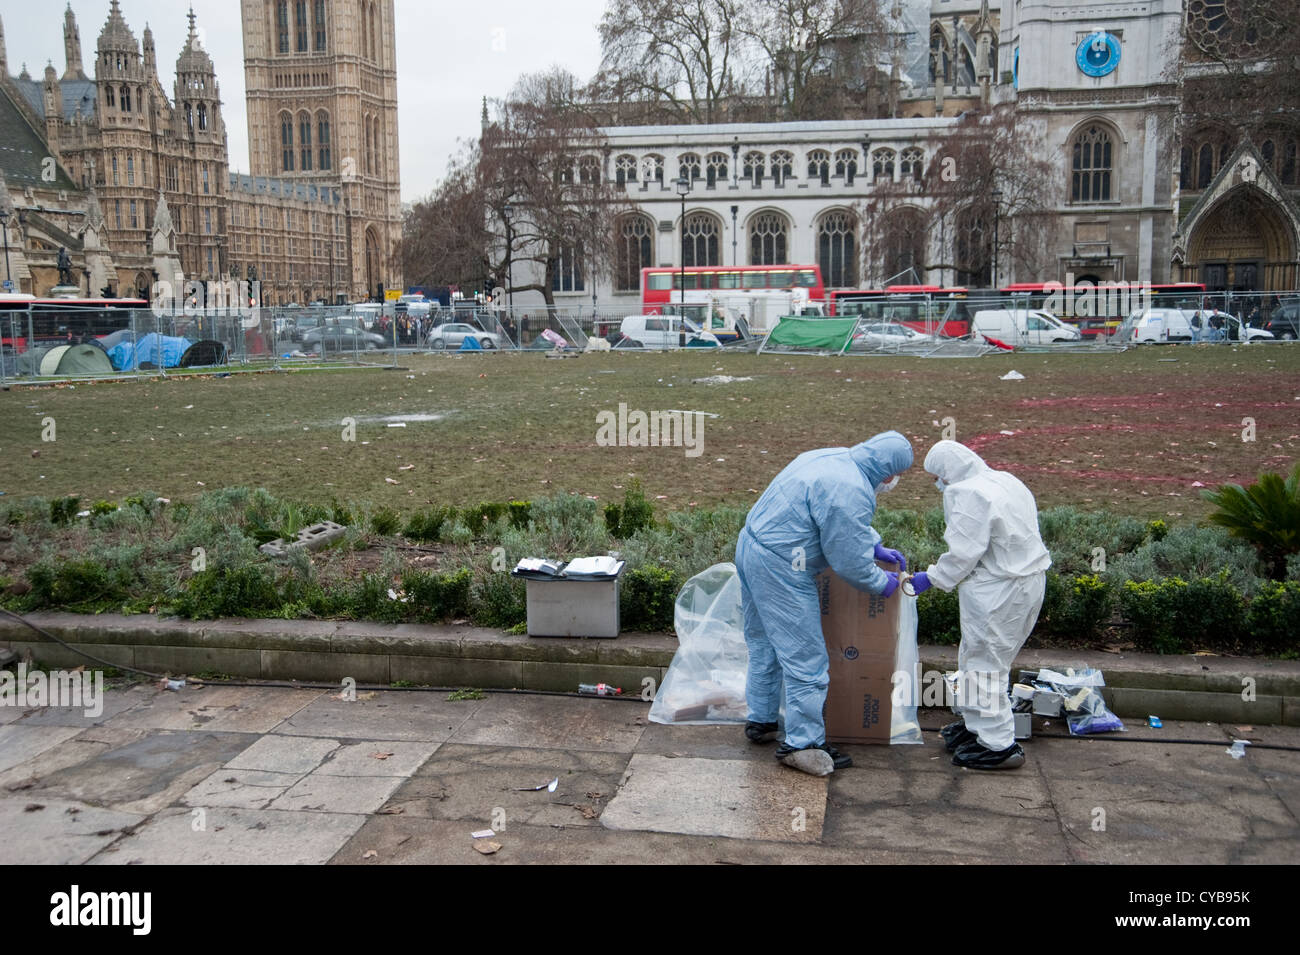 Police collecting evidence in parliament Square after student demonstrations Stock Photo